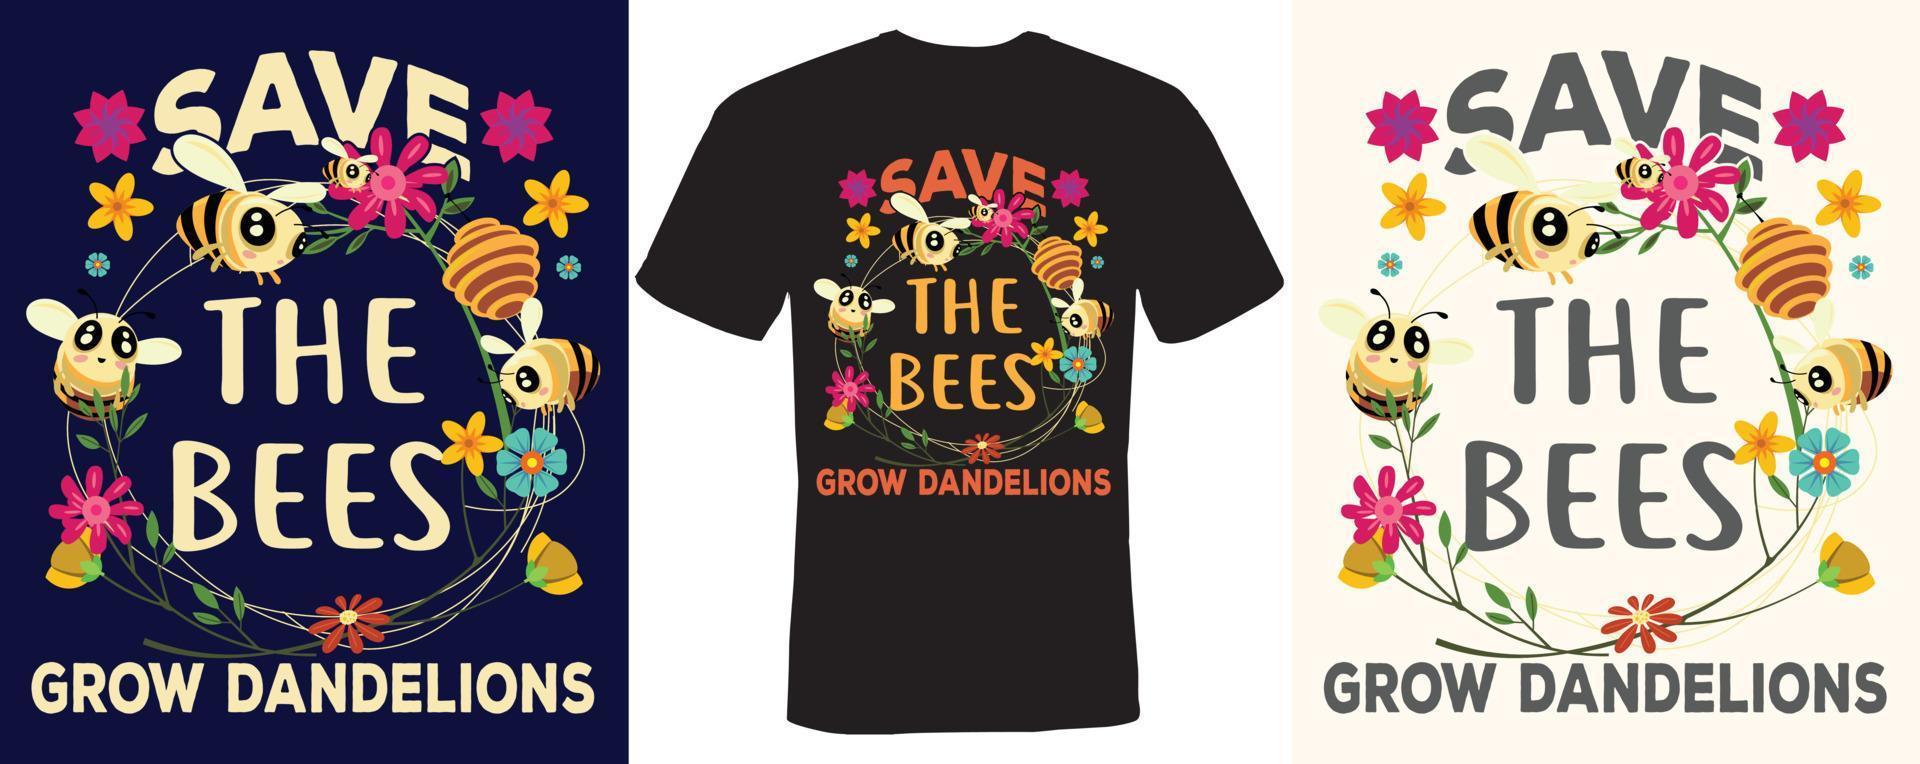 Save the bees grow dandelions t-shirt design for Bees vector